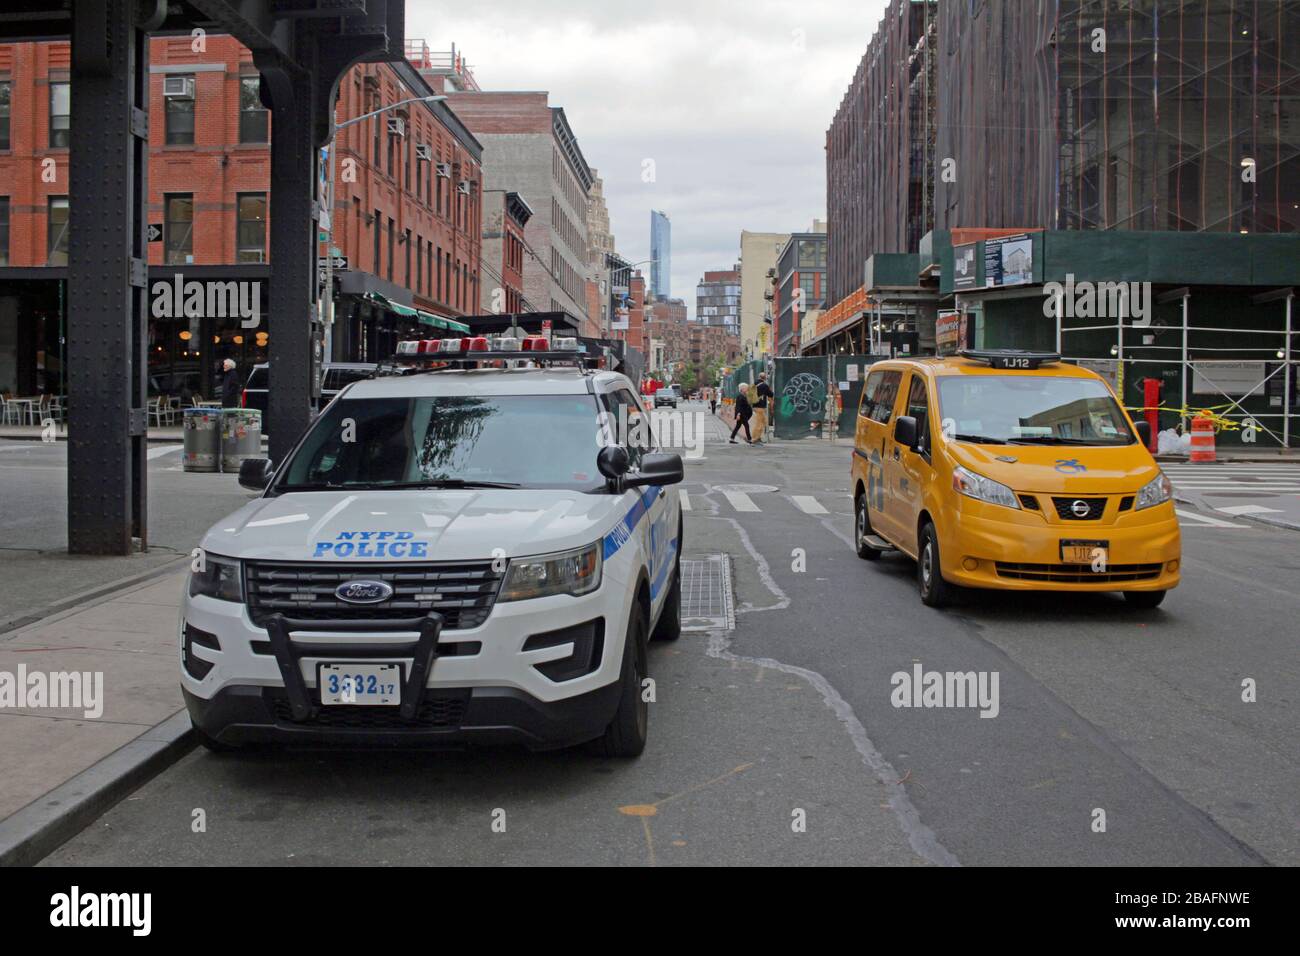 NYPD vehicle and New York Yellow Cab taxi, Meatpacking District, New York City, USA Stock Photo